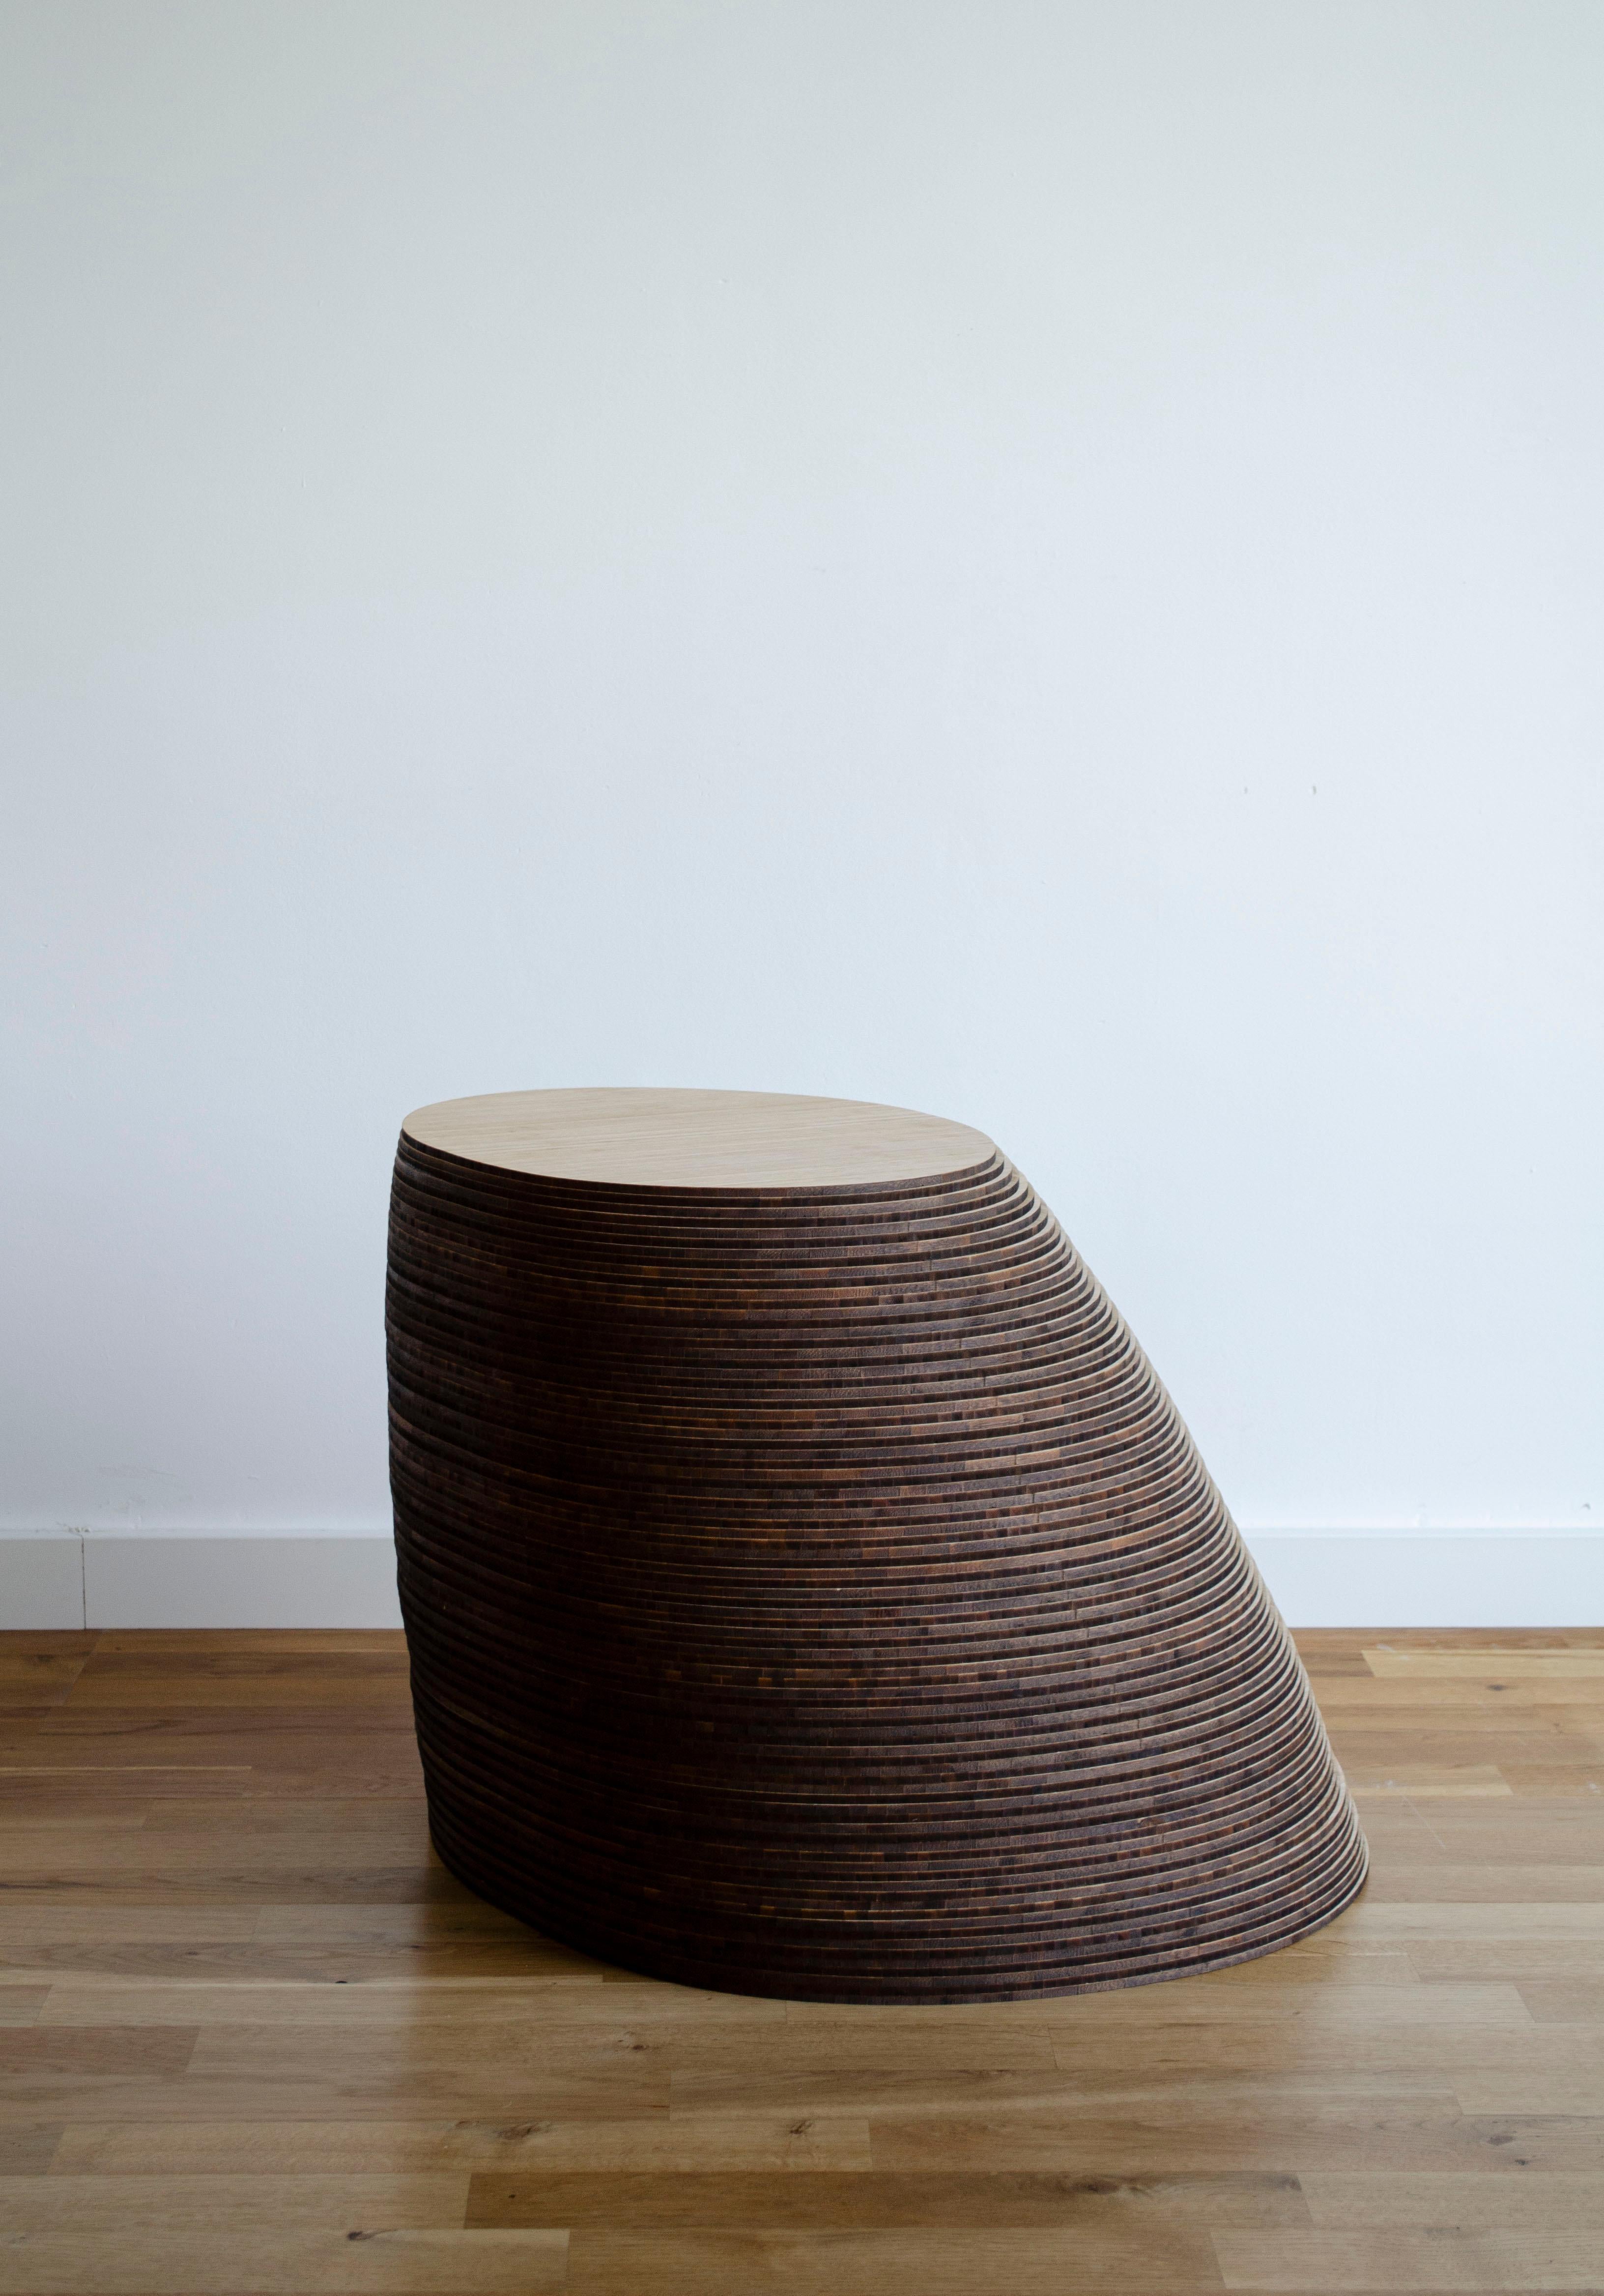 Stratum Saxum Bamboo Stool by Daan De Wit
Limited Edition of 50
Dimensions: D 56 x W 60 x H 45 cm.
Materials: Bamboo.

Sustainable in technique, material, and production.
Stratum Saxum is a collection based on the same technique as the whole Stratum